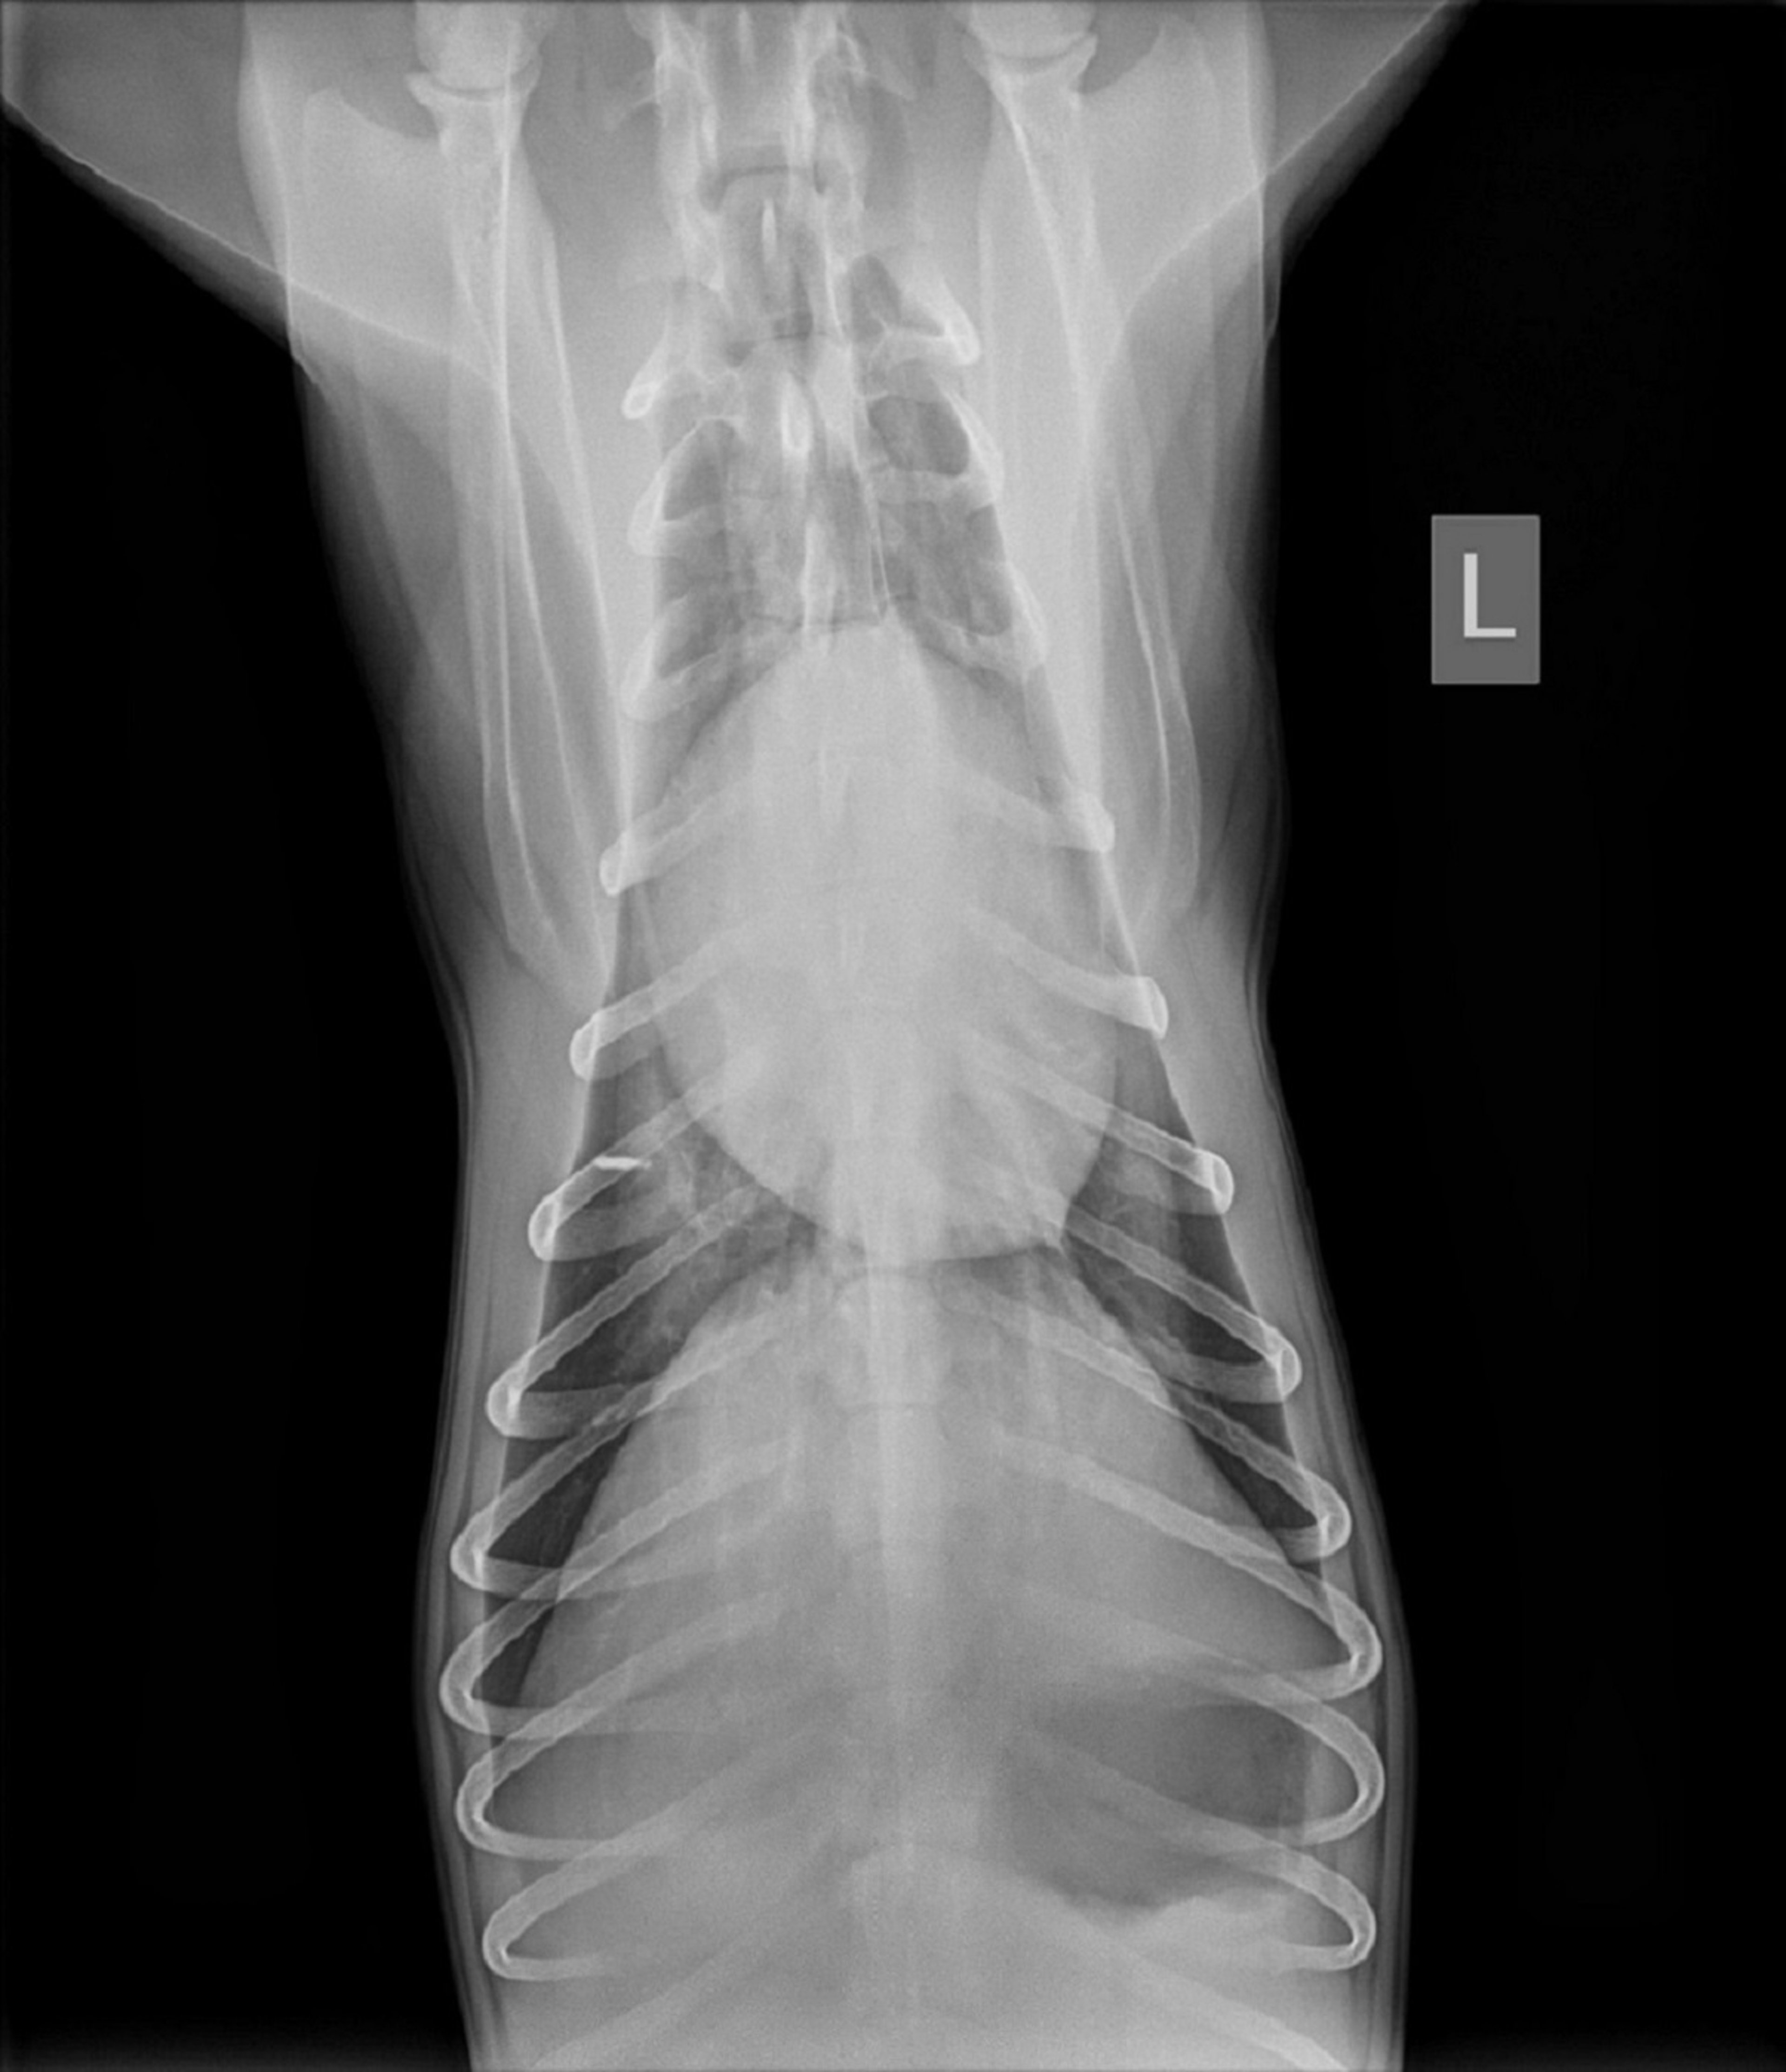 Ventrodorsal radiograph, normal dog with narrow chest